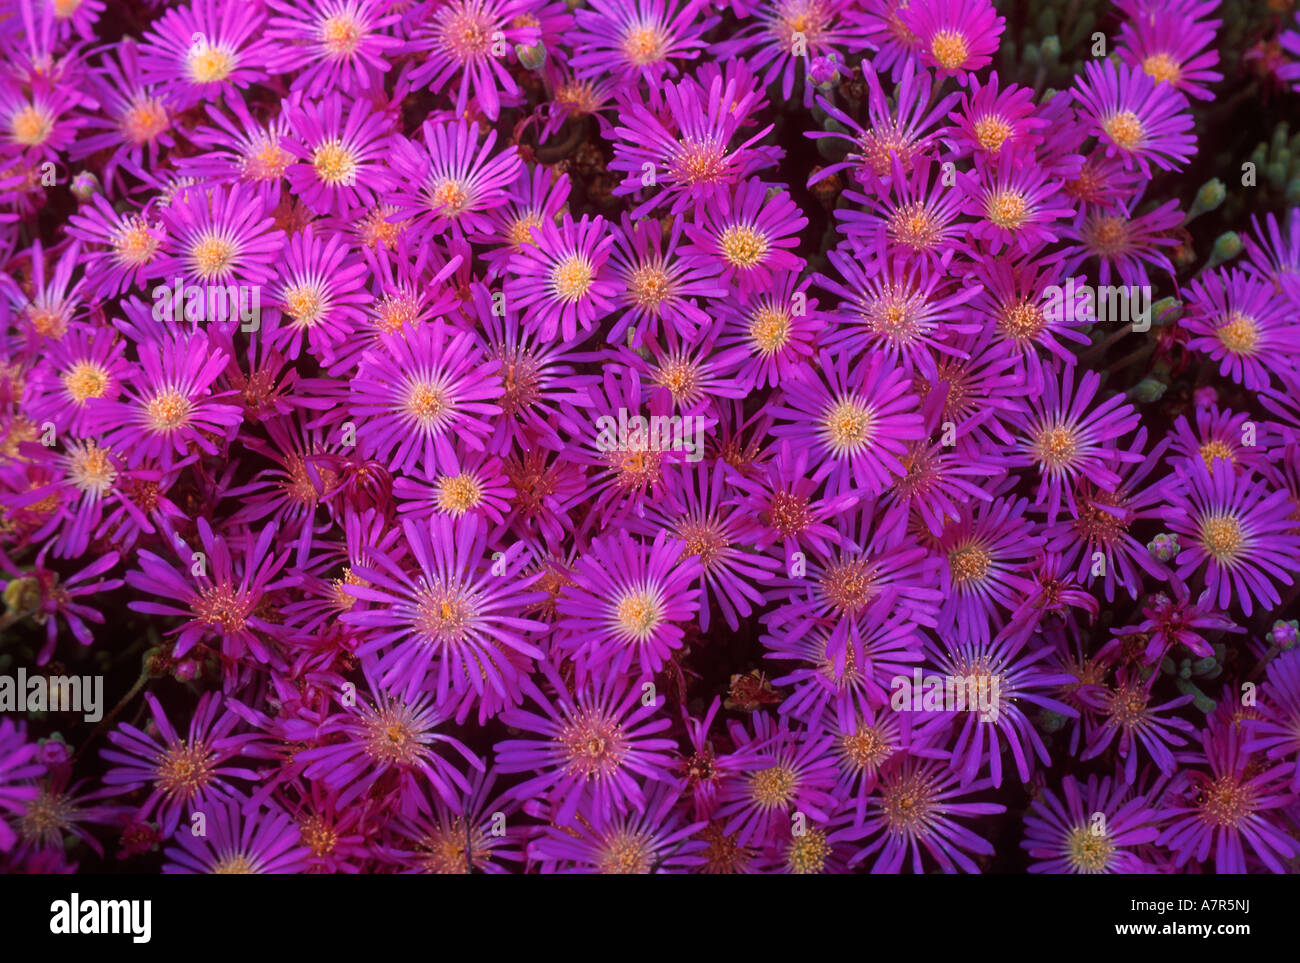 Masses of flowers of fynt nouroebos Drosanthemum hispidum near Springbok in Namaqualand North Western Cape South Africa Stock Photo